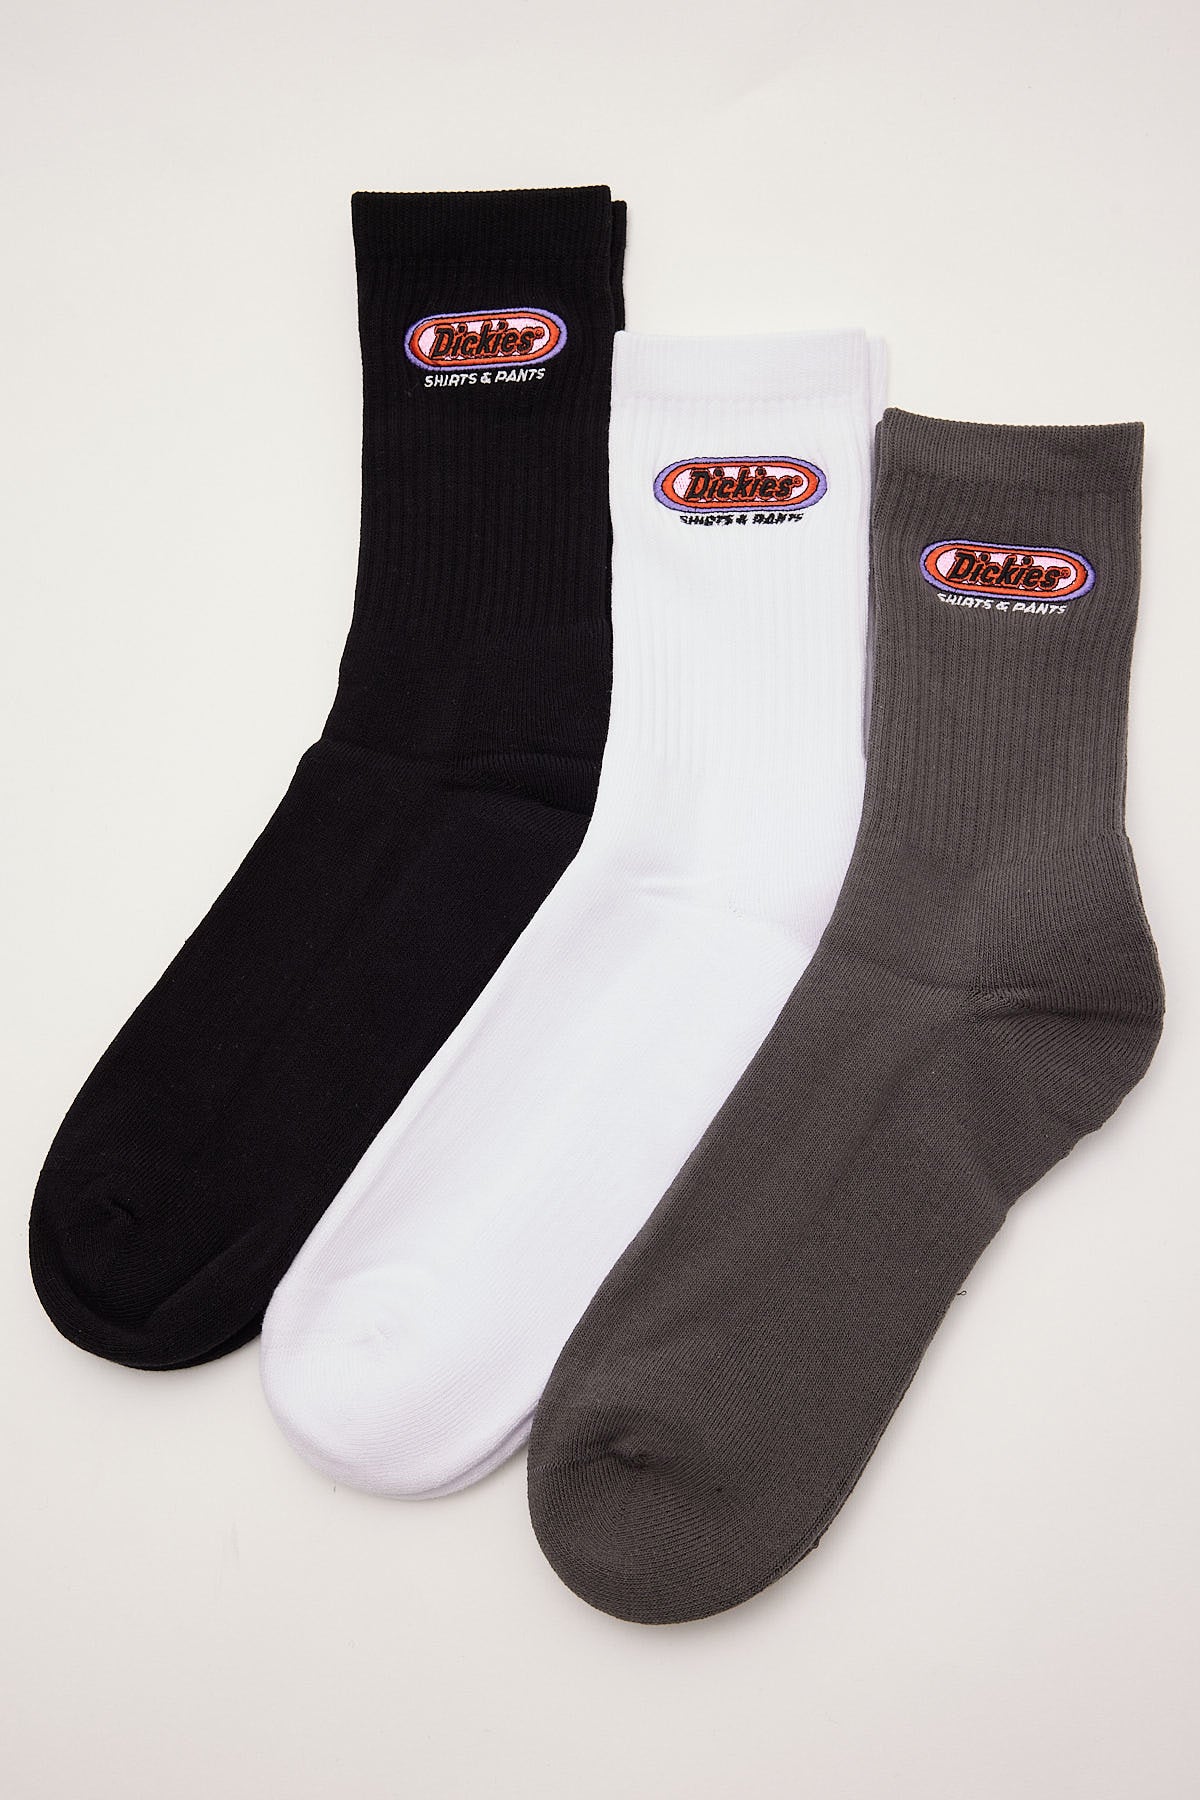 Dickies Tracked Out Sock 3pk White/Black/Charcoal